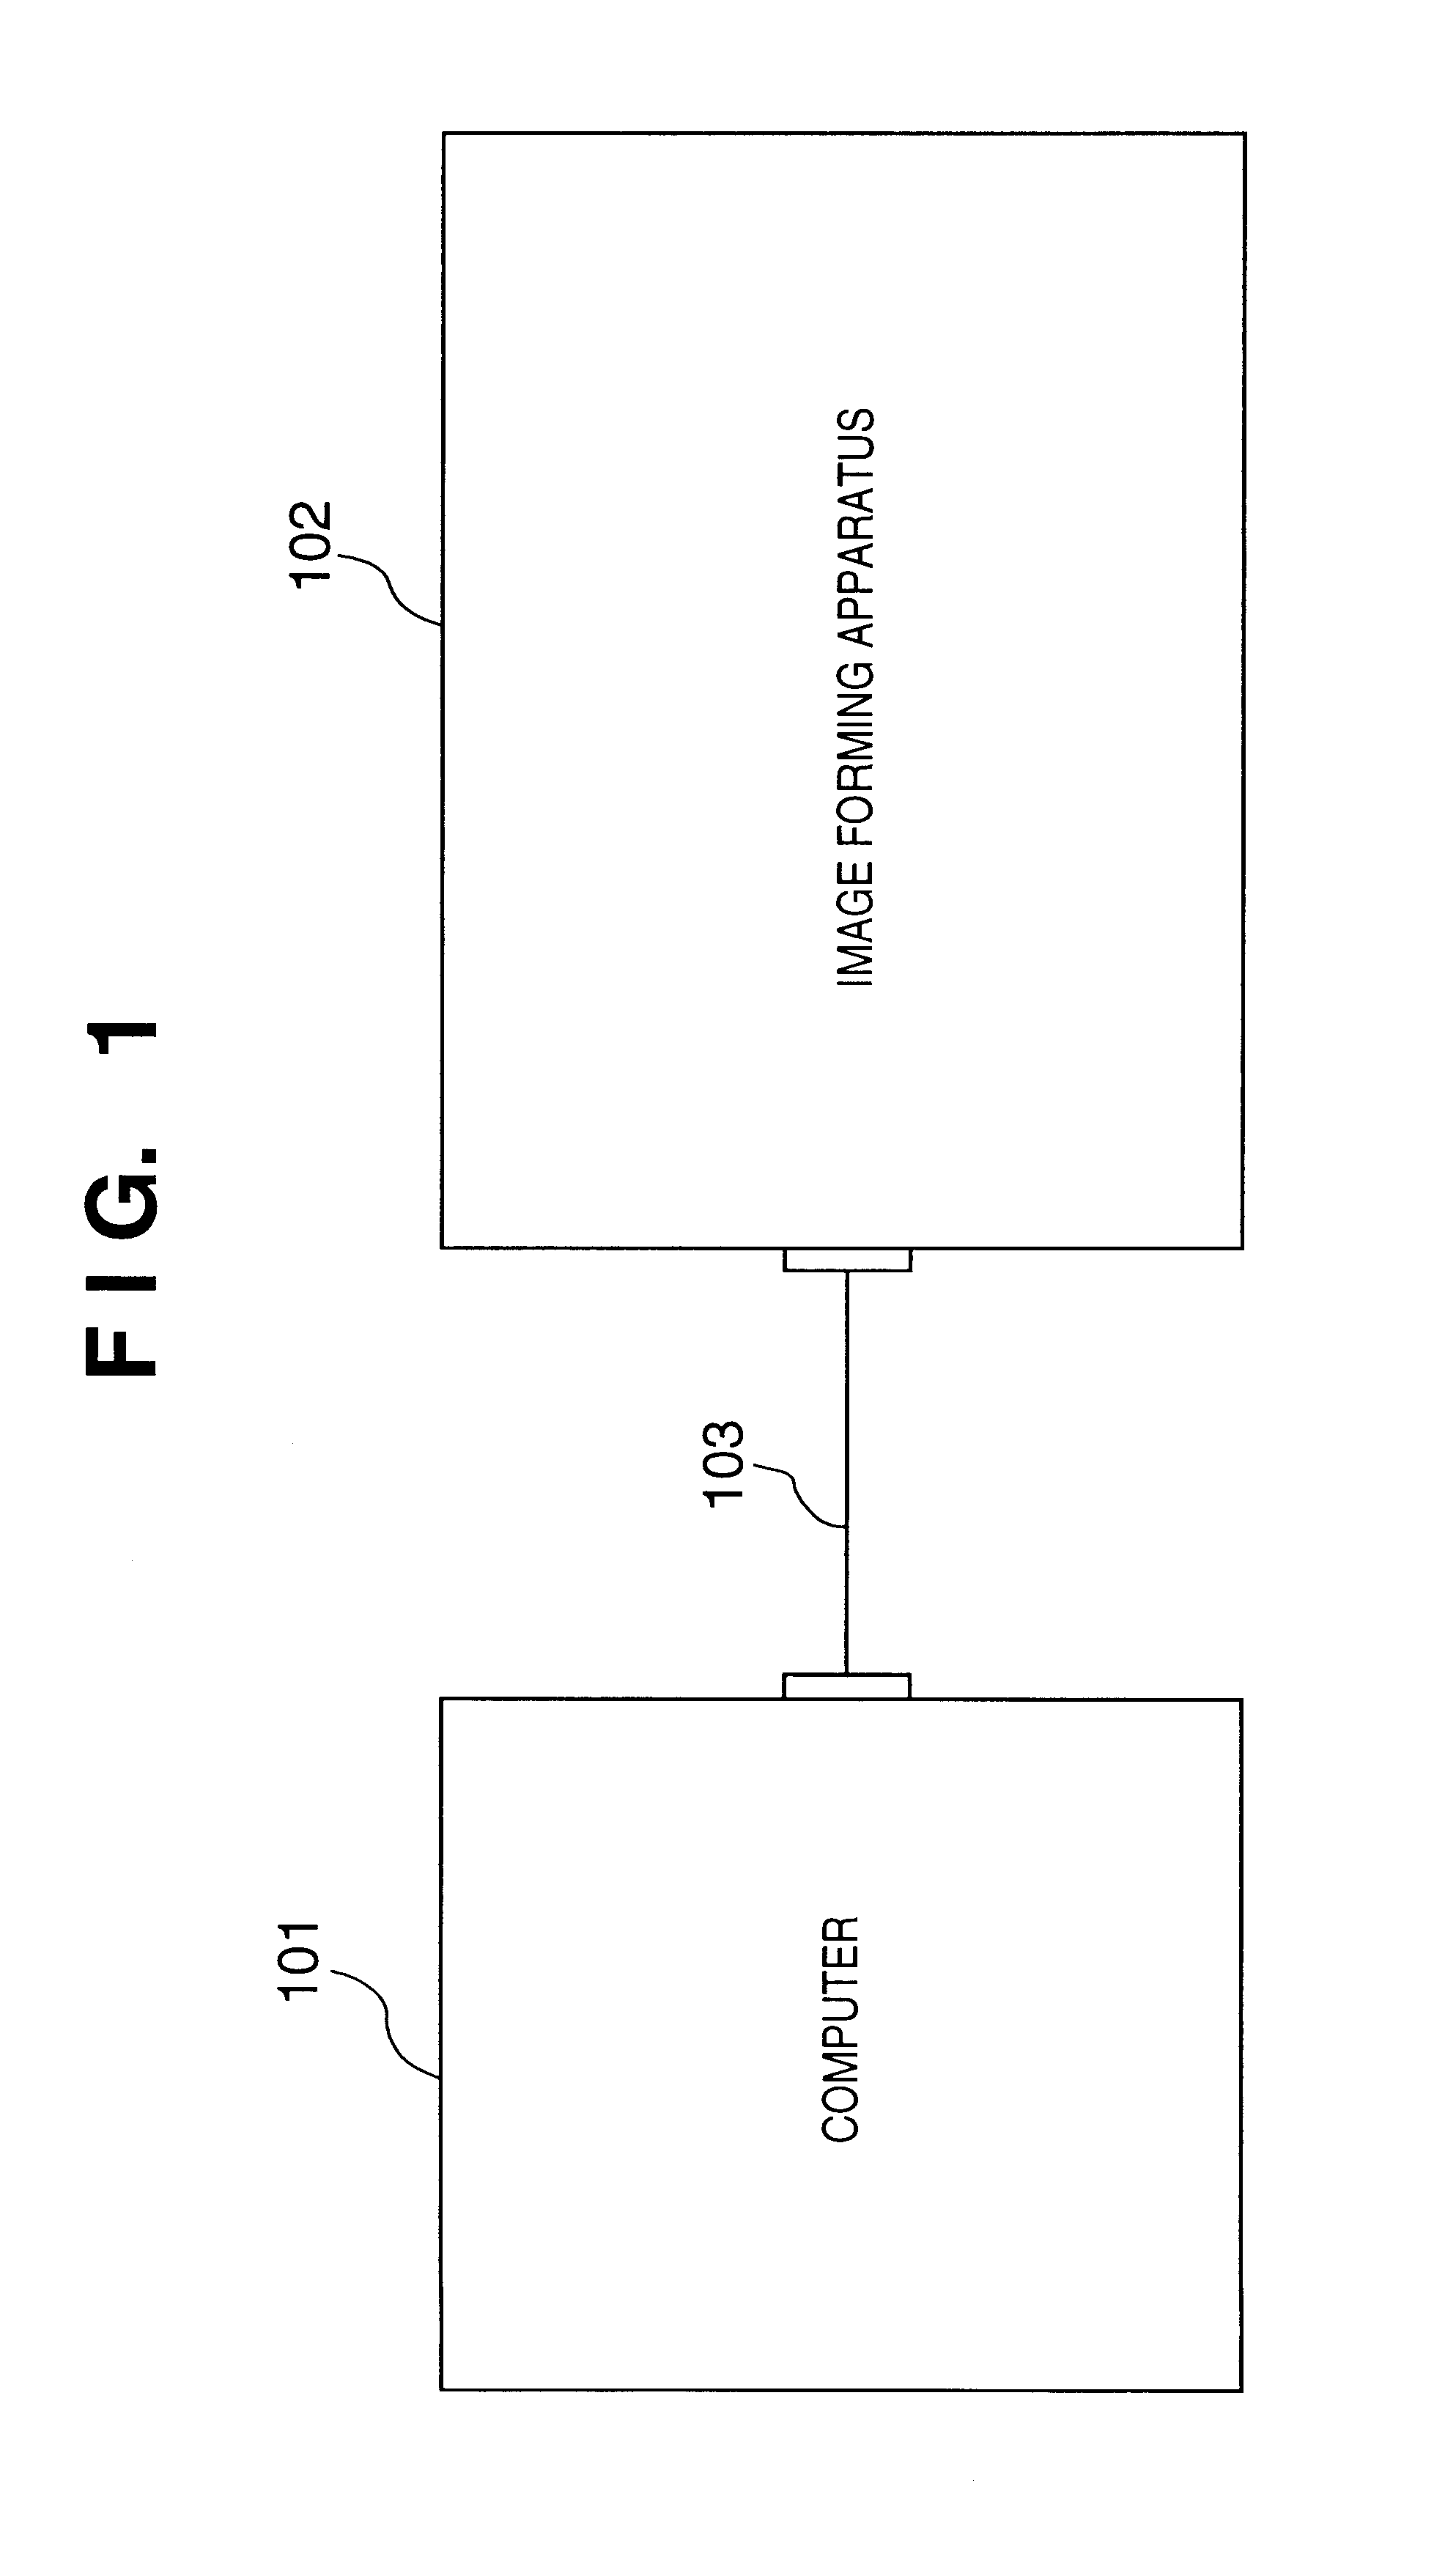 Image processing system, apparatus, method, and software